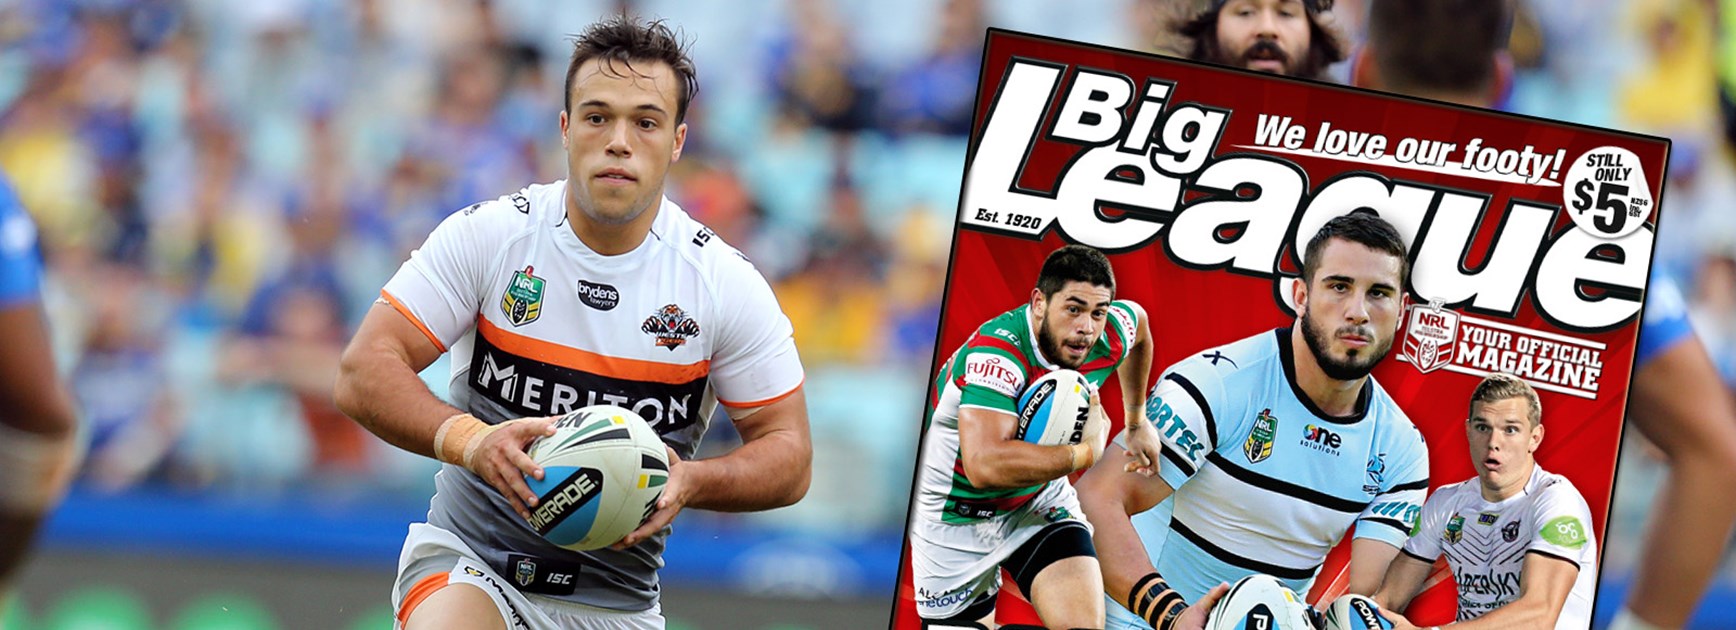 Halfback Luke Brooks has been entrusted with leading the Wests Tigers to their next premiership push.